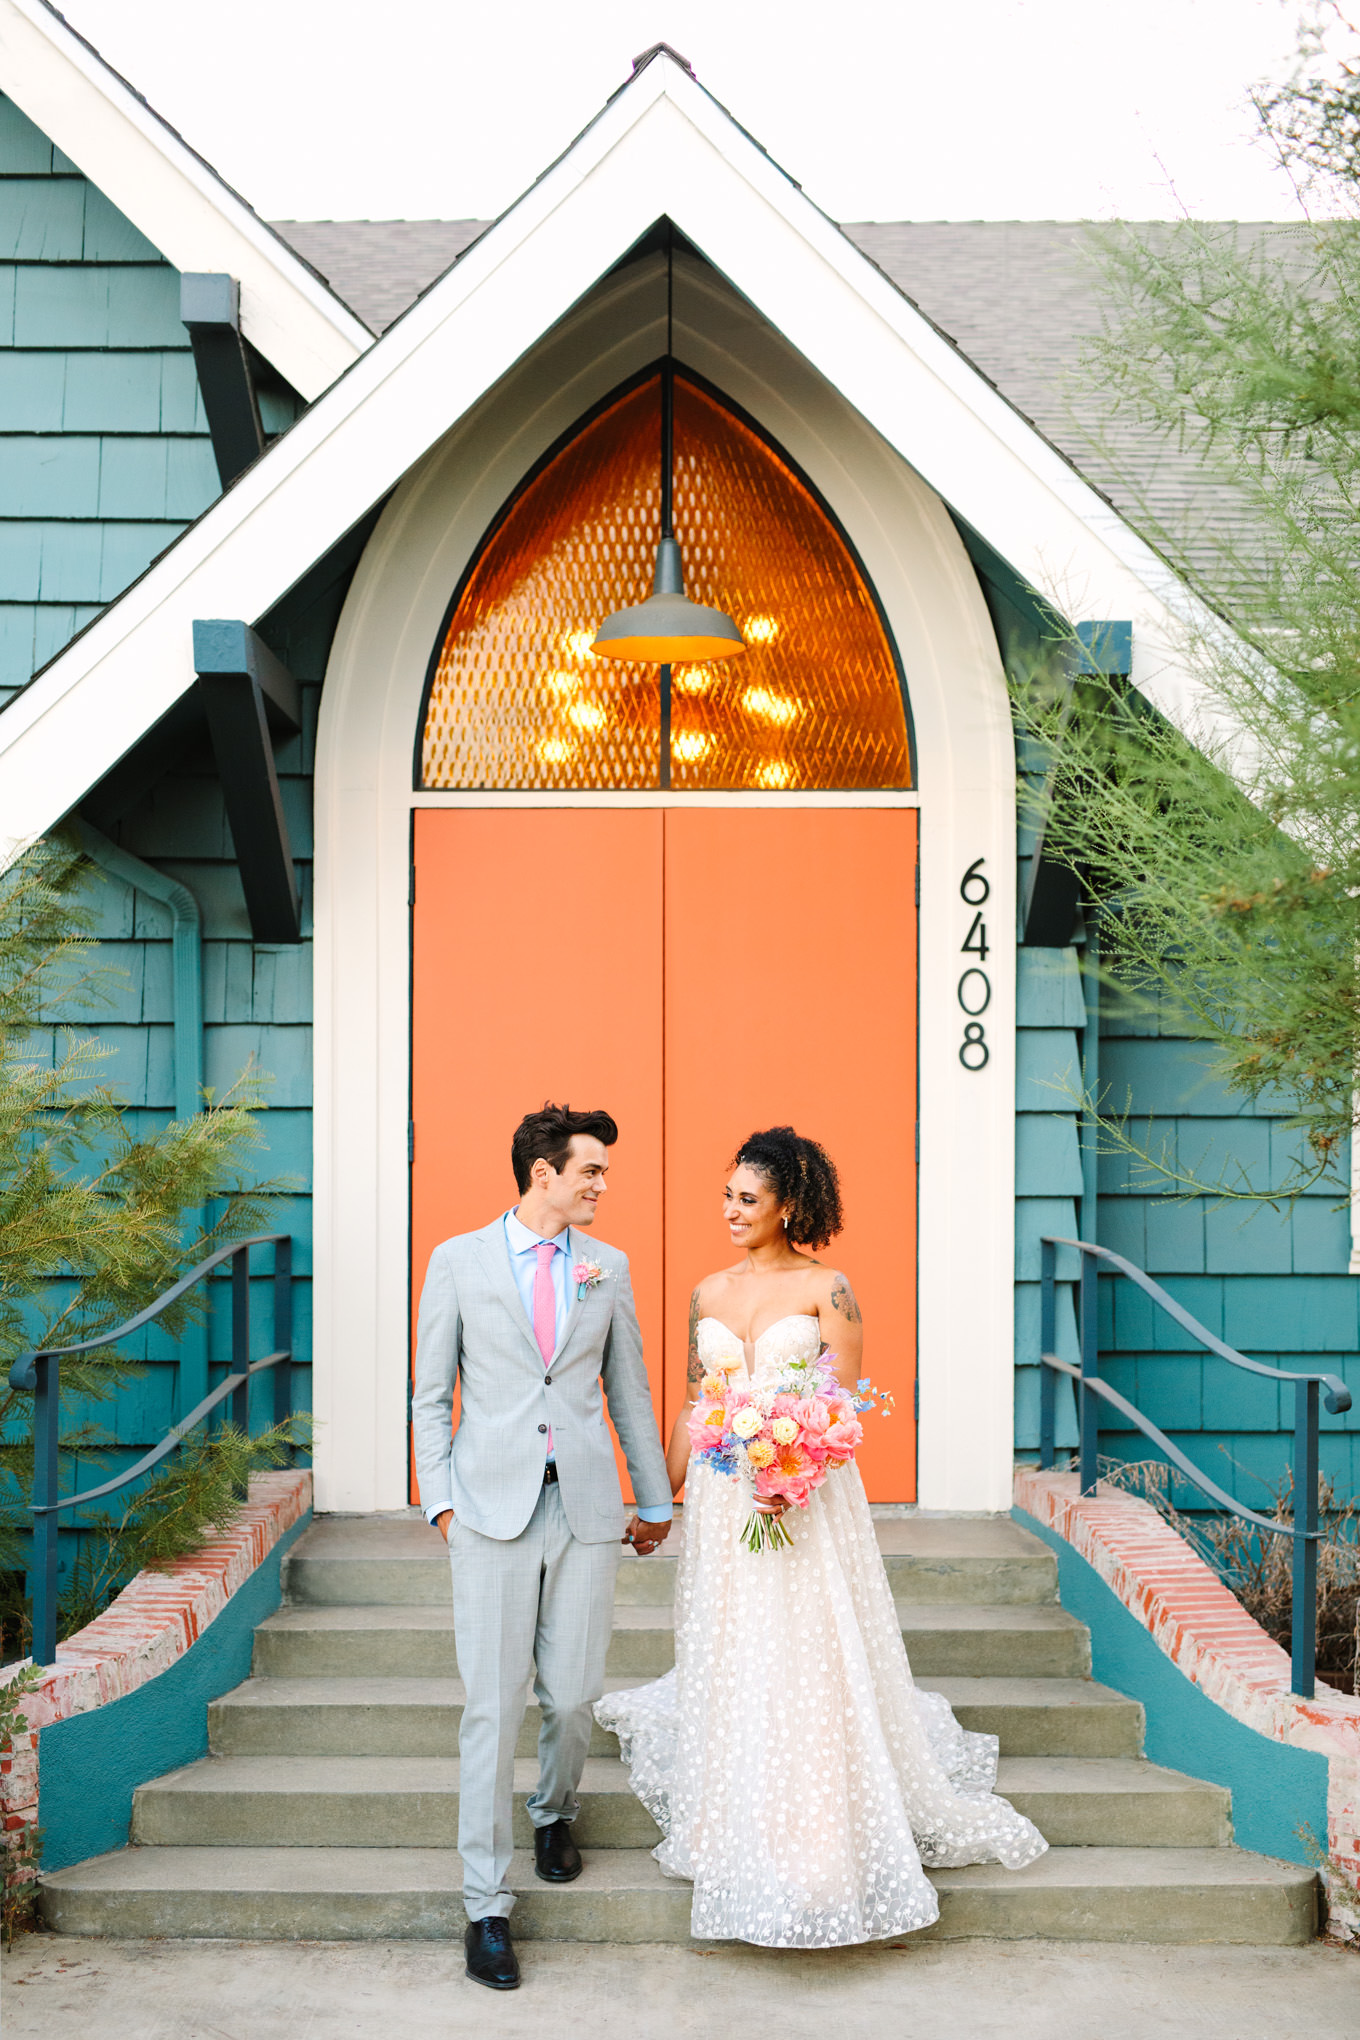 Wedding portrait in front of orange door | Colorful pop-up micro wedding at The Ruby Street Los Angeles featured on Green Wedding Shoes | Colorful and elevated photography for fun-loving couples in Southern California | #colorfulwedding #popupwedding #weddingphotography #microwedding Source: Mary Costa Photography | Los Angeles